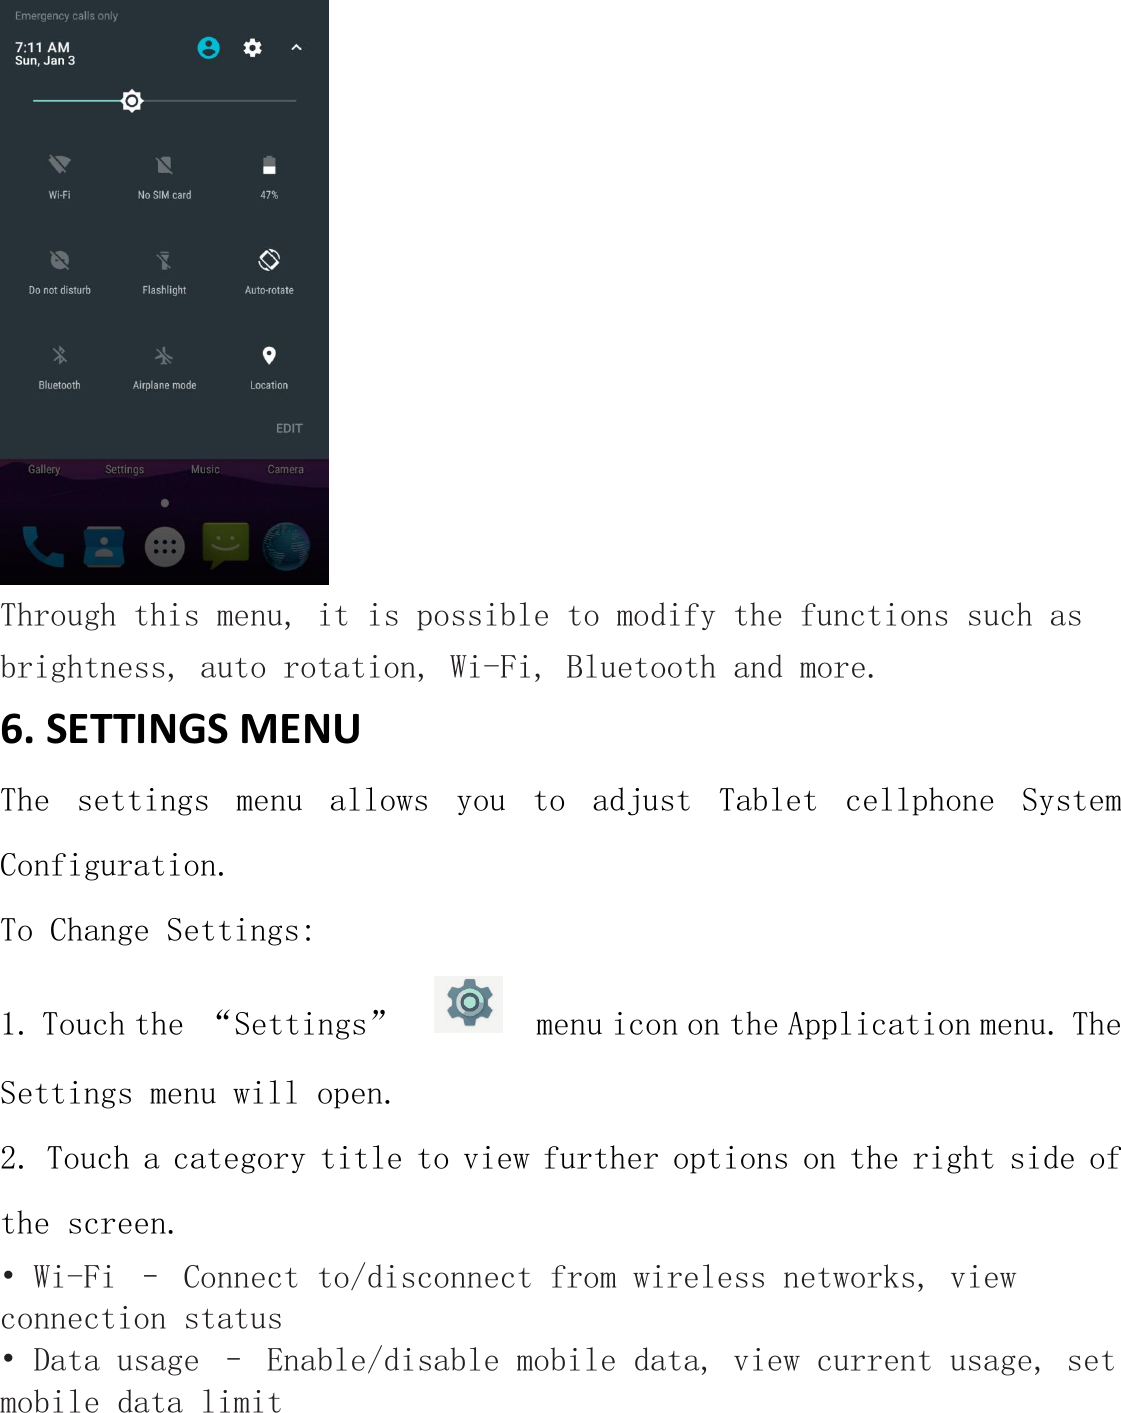  Through this menu, it is possible to modify the functions such as brightness, auto rotation, Wi-Fi, Bluetooth and more. 6. SETTINGS MENU   The  settings  menu  allows  you  to  adjust  Tablet  cellphone  System Configuration. To Change Settings: 1. Touch the “Settings”     menu icon on the Application menu. The Settings menu will open. 2. Touch a category title to view further options on the right side of the screen. • Wi-Fi – Connect to/disconnect from wireless networks, view connection status • Data usage – Enable/disable mobile data, view current usage, set mobile data limit  